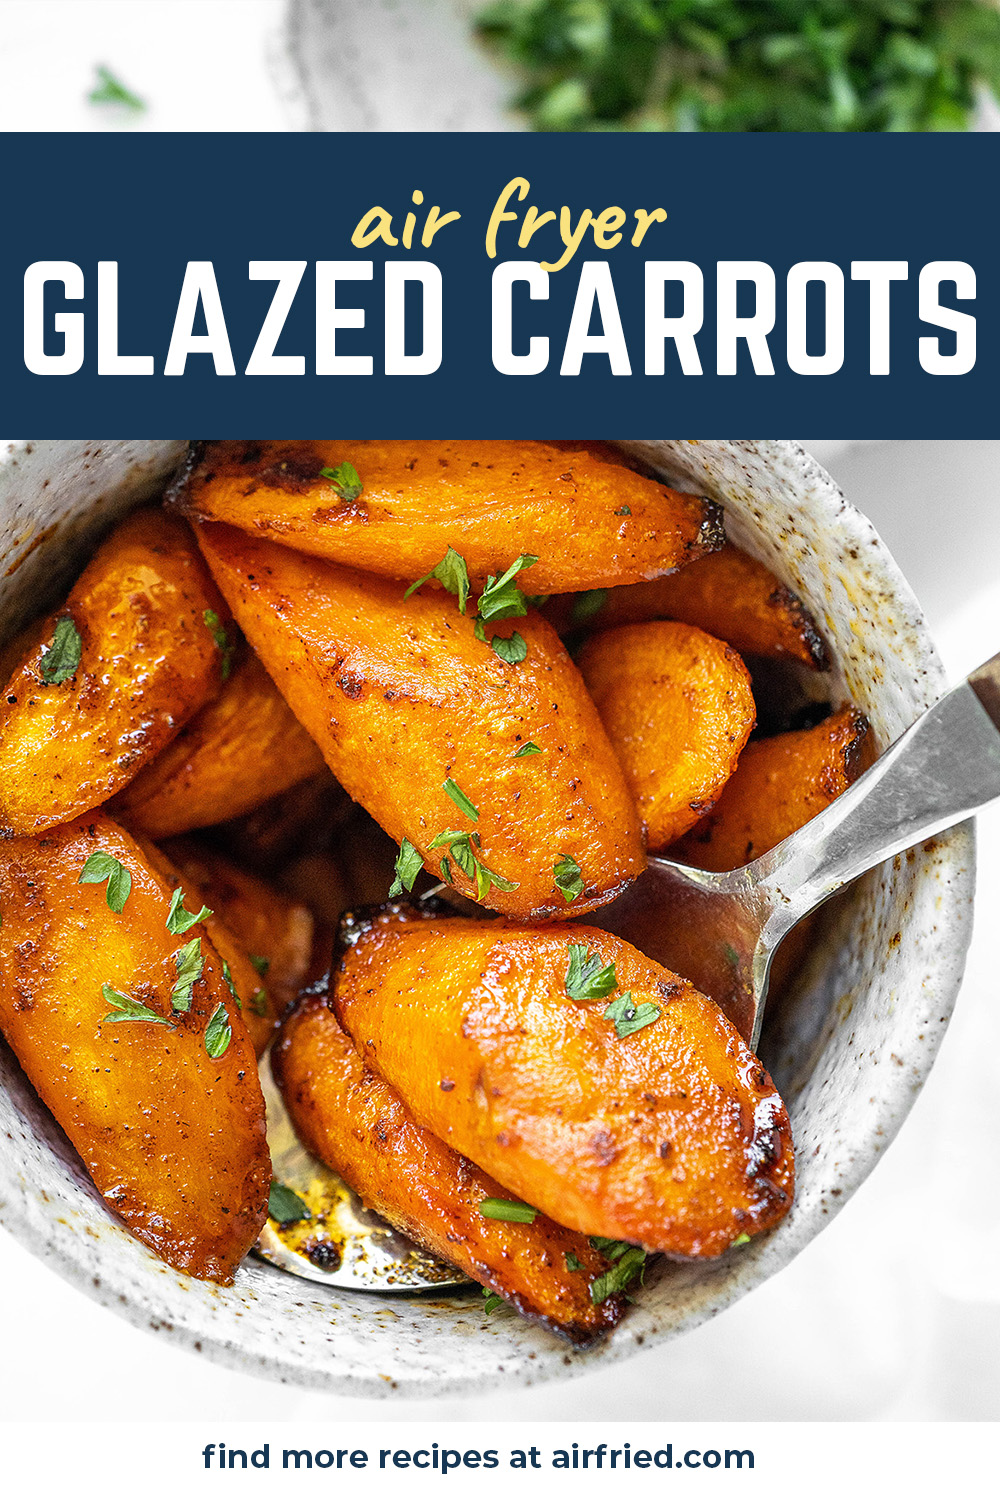 These carrots are coated in a fun spiced honey glaze.  These flavors are fantastic on these little carrot bites!